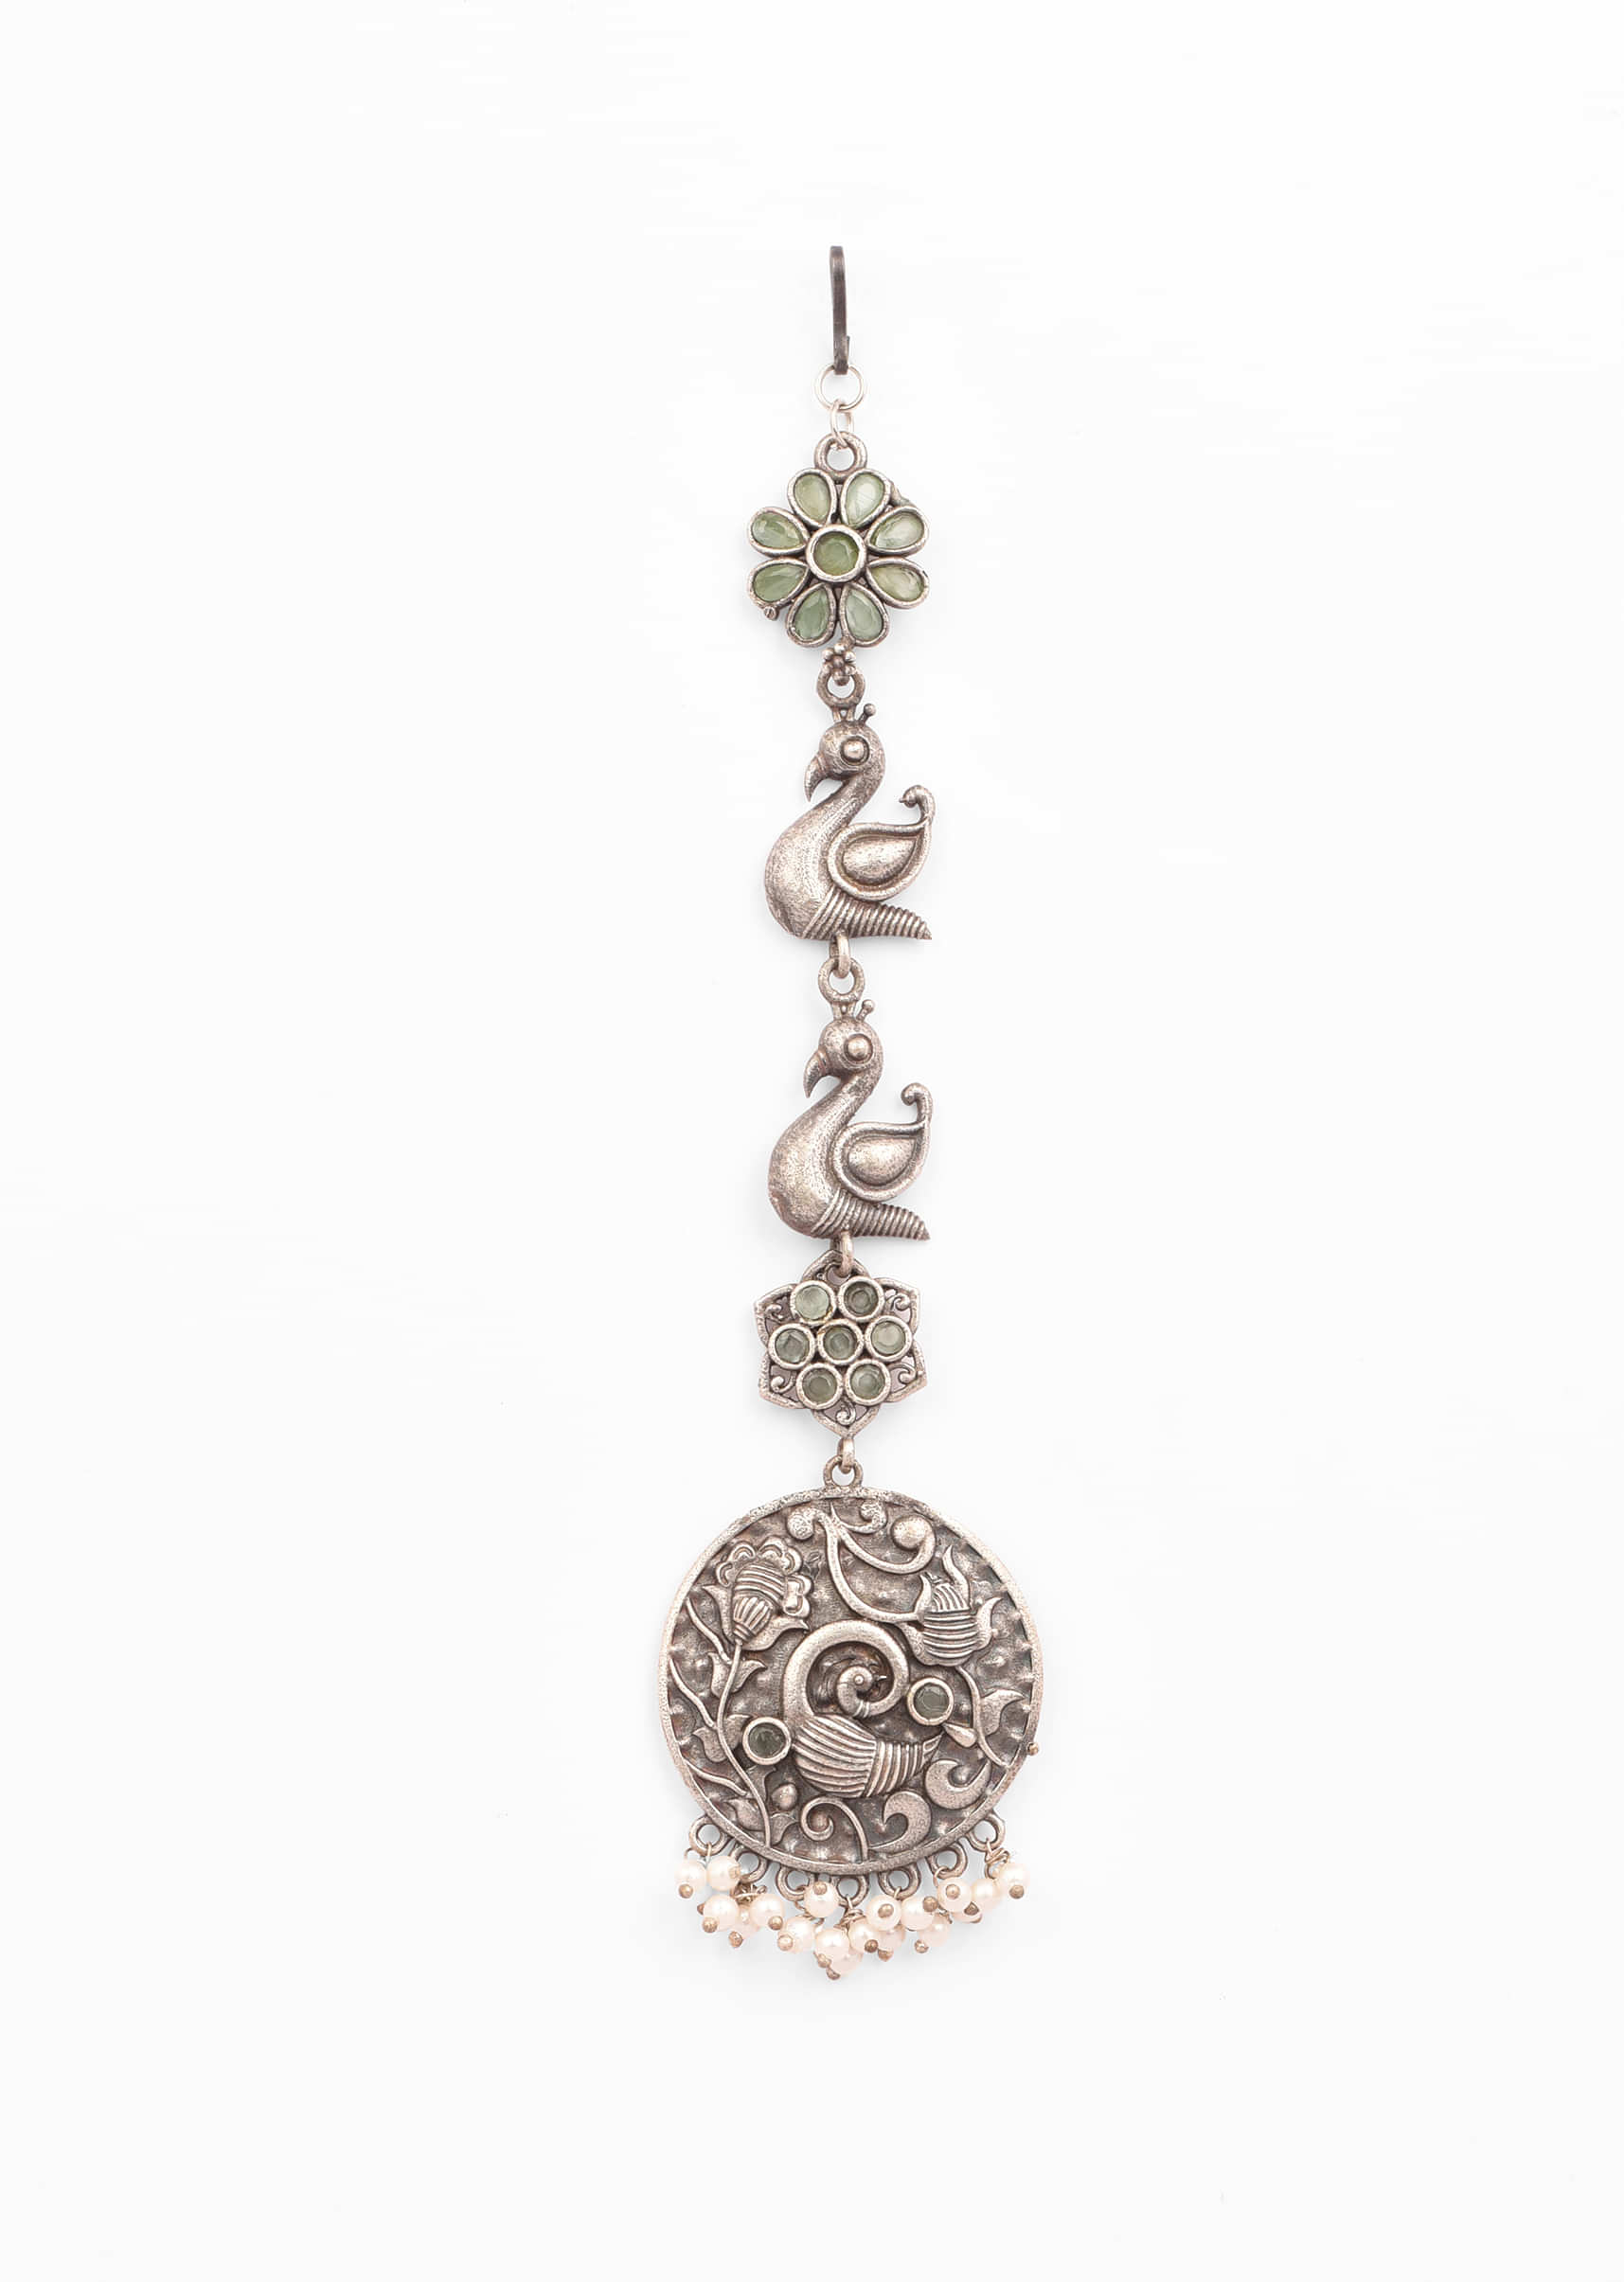 Oxidised Silver Mangtika With Carved Peacock Motif And Studded In Green Stones 